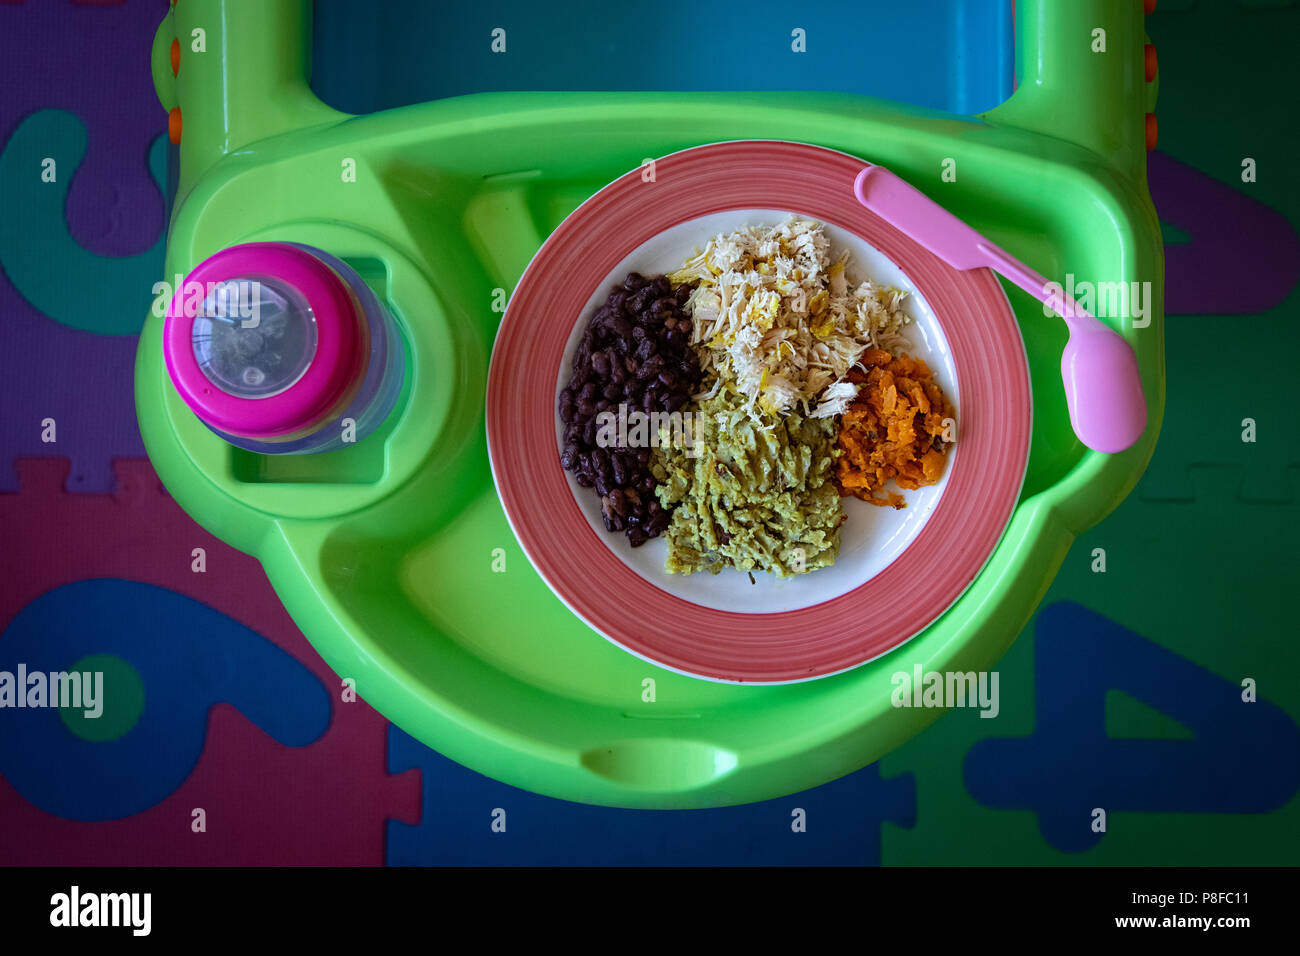 Overhead view of baby food on a plate Stock Photo